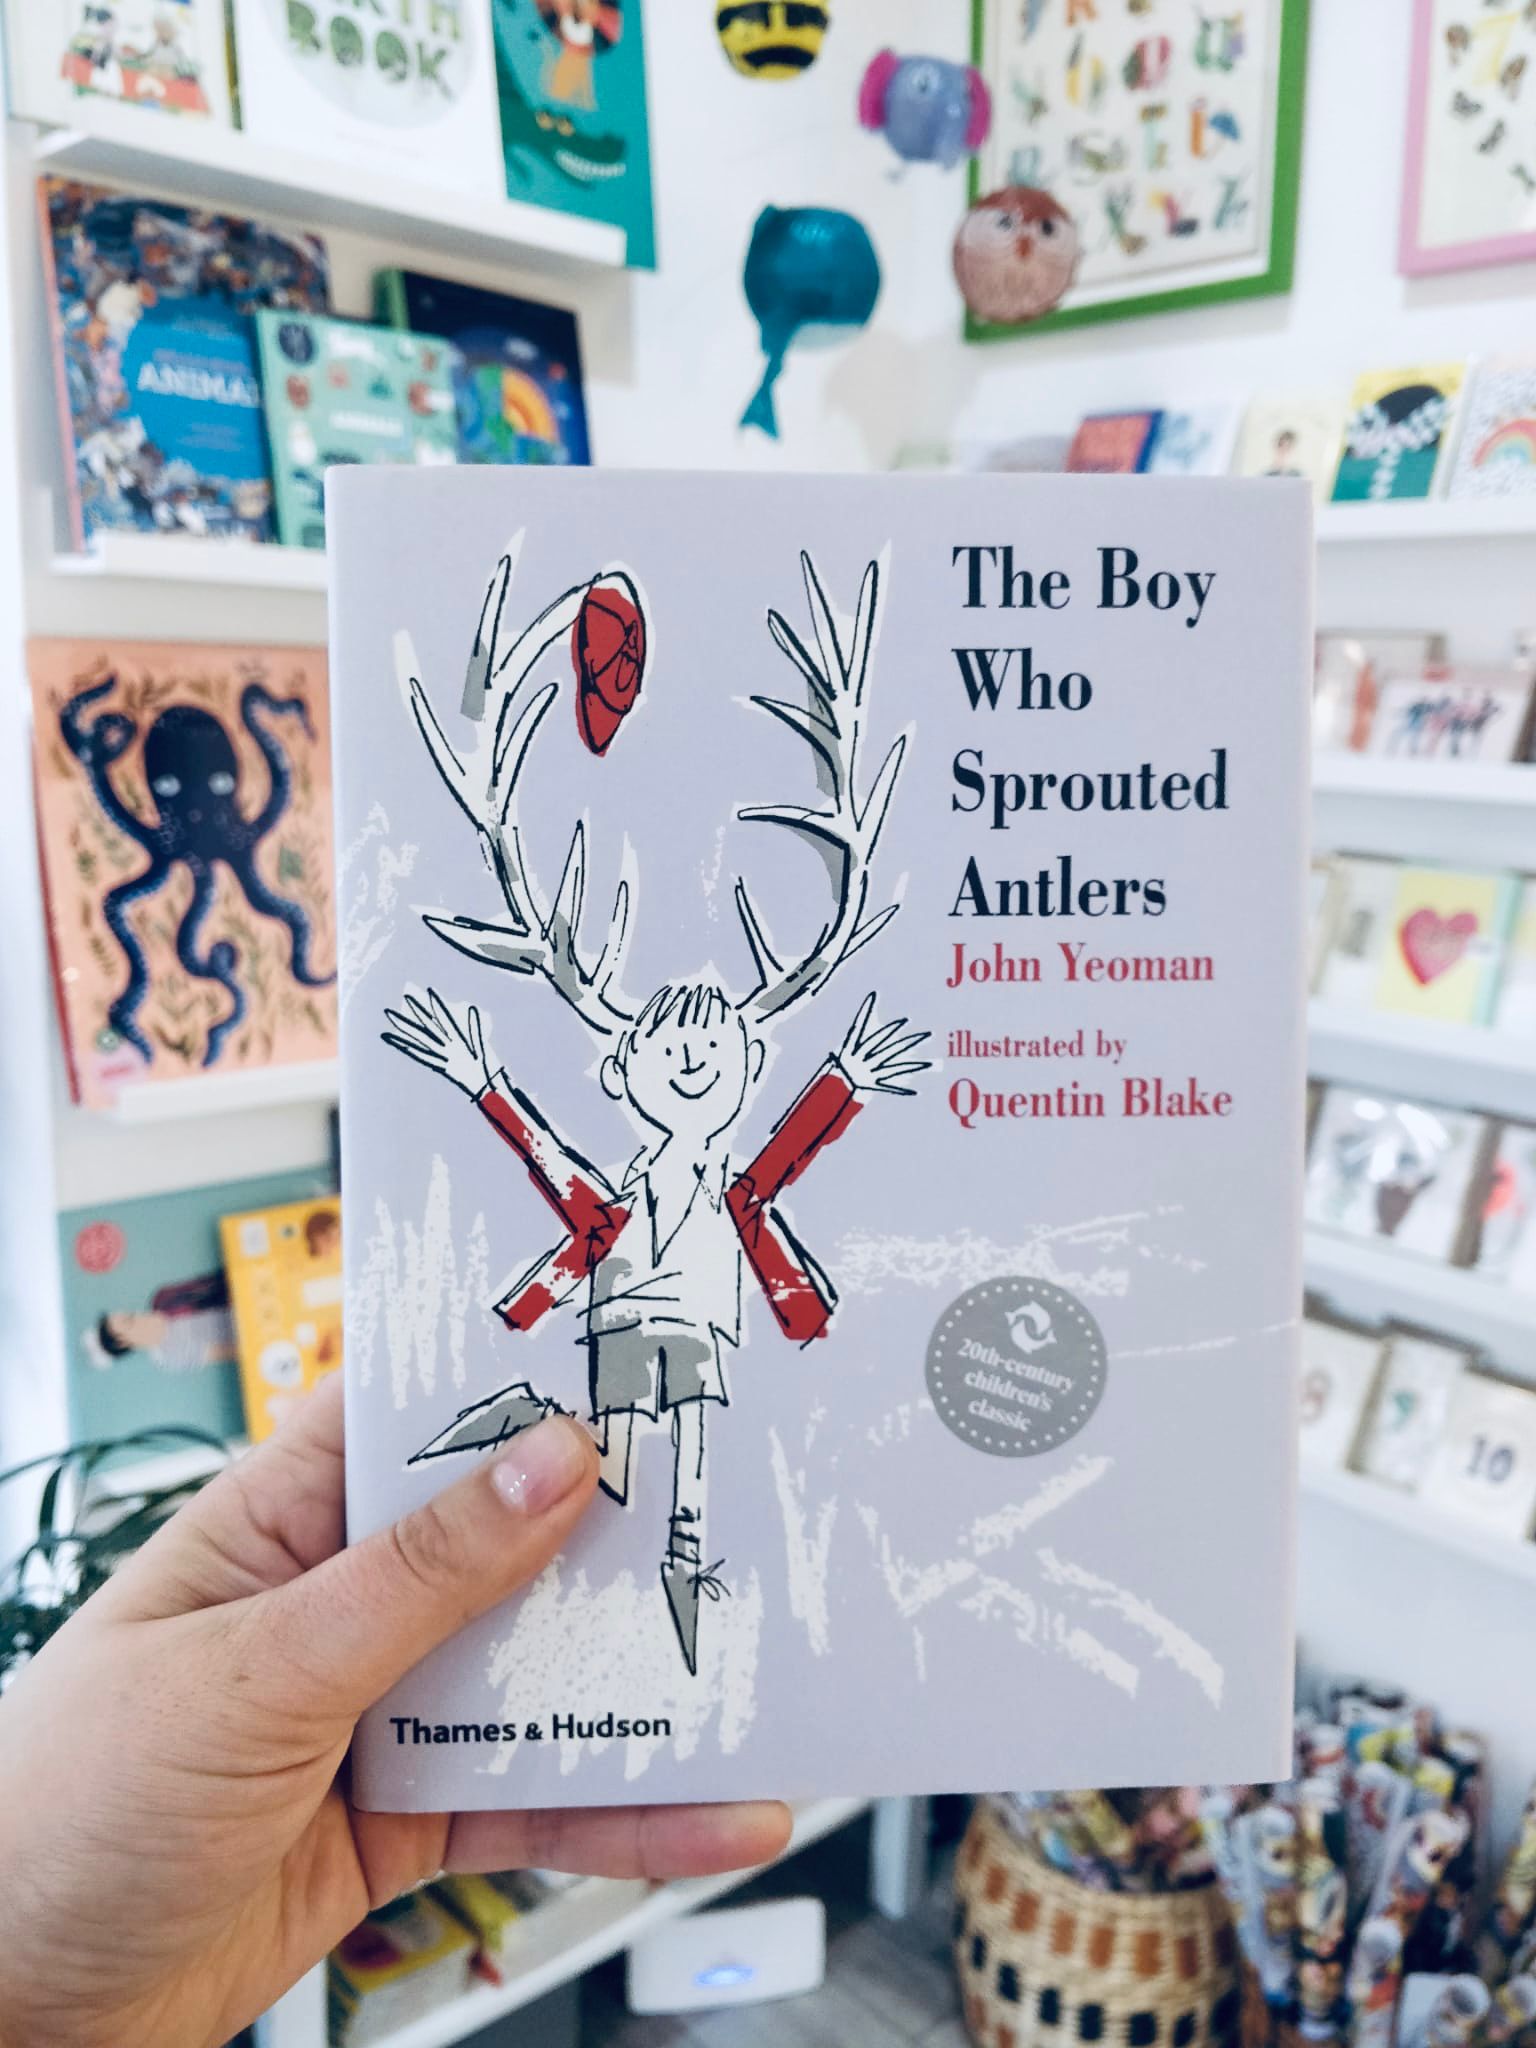 The Boy Who Sprouted Antlers